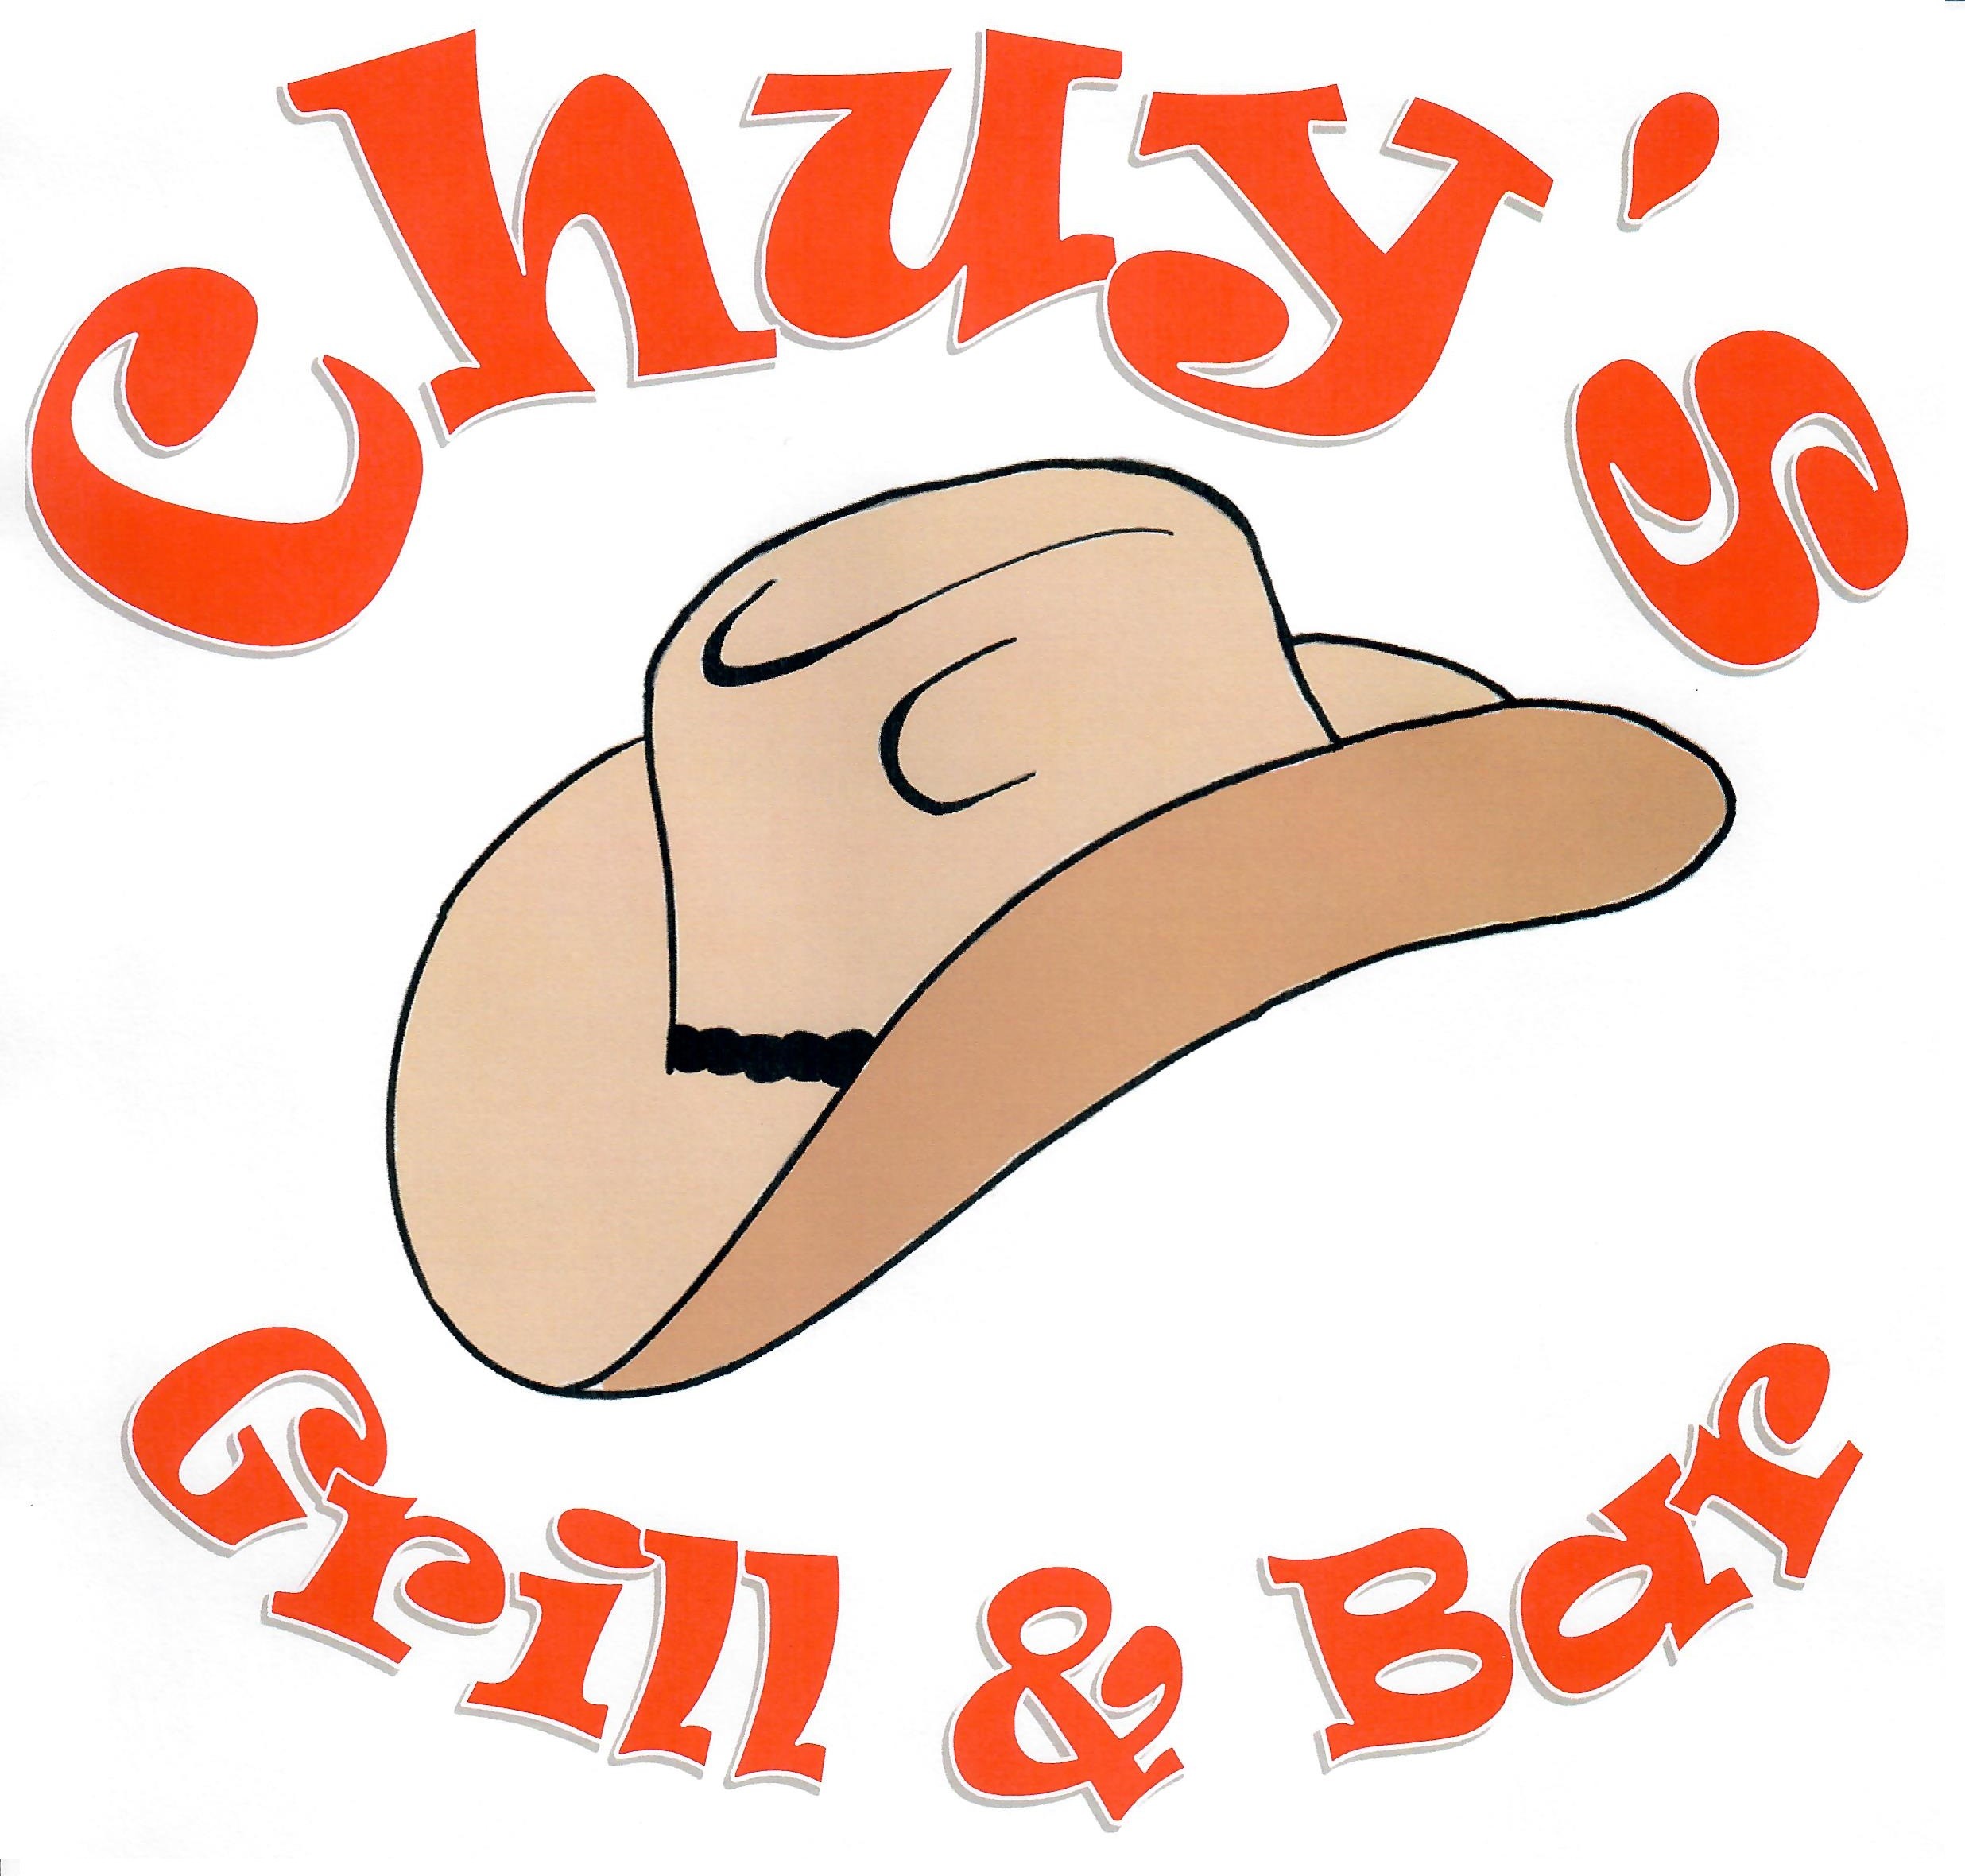 Chuy's Grill & Bar